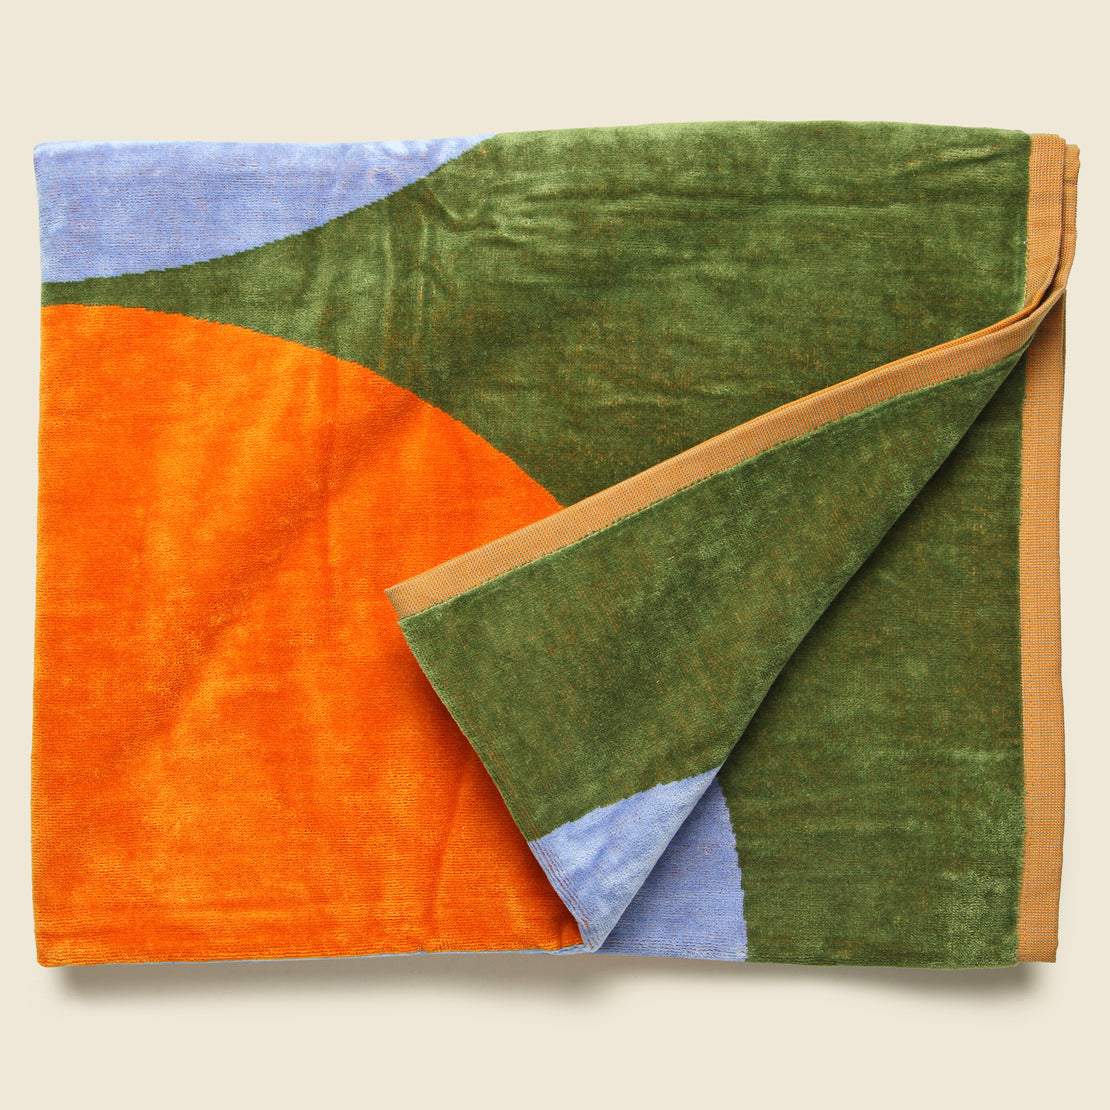 Ellipse Towel - Green/Orange/Blue - Lateral Objects - STAG Provisions - Gift - Towel